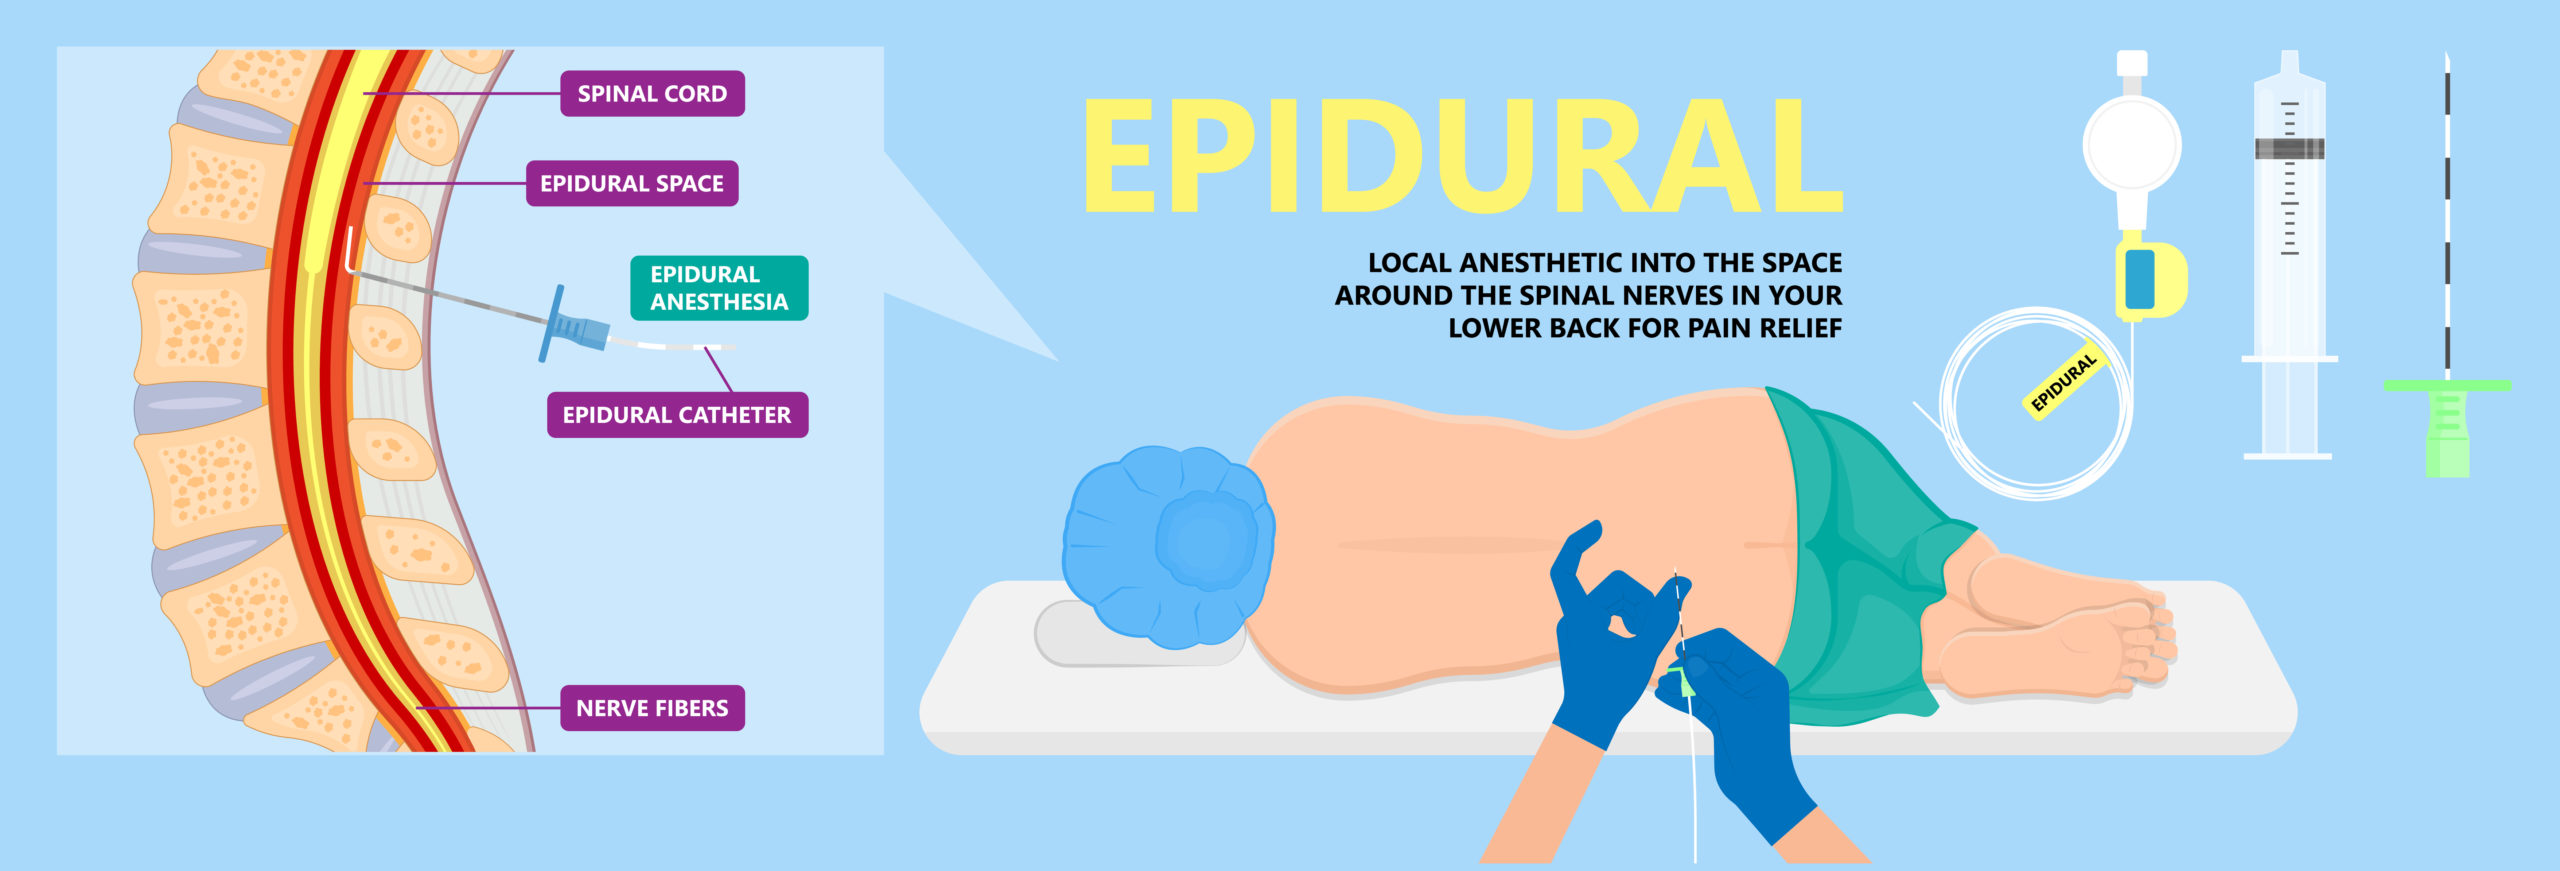 : Illustrated diagram explaining epidural steroid injection in the lumbar spine.